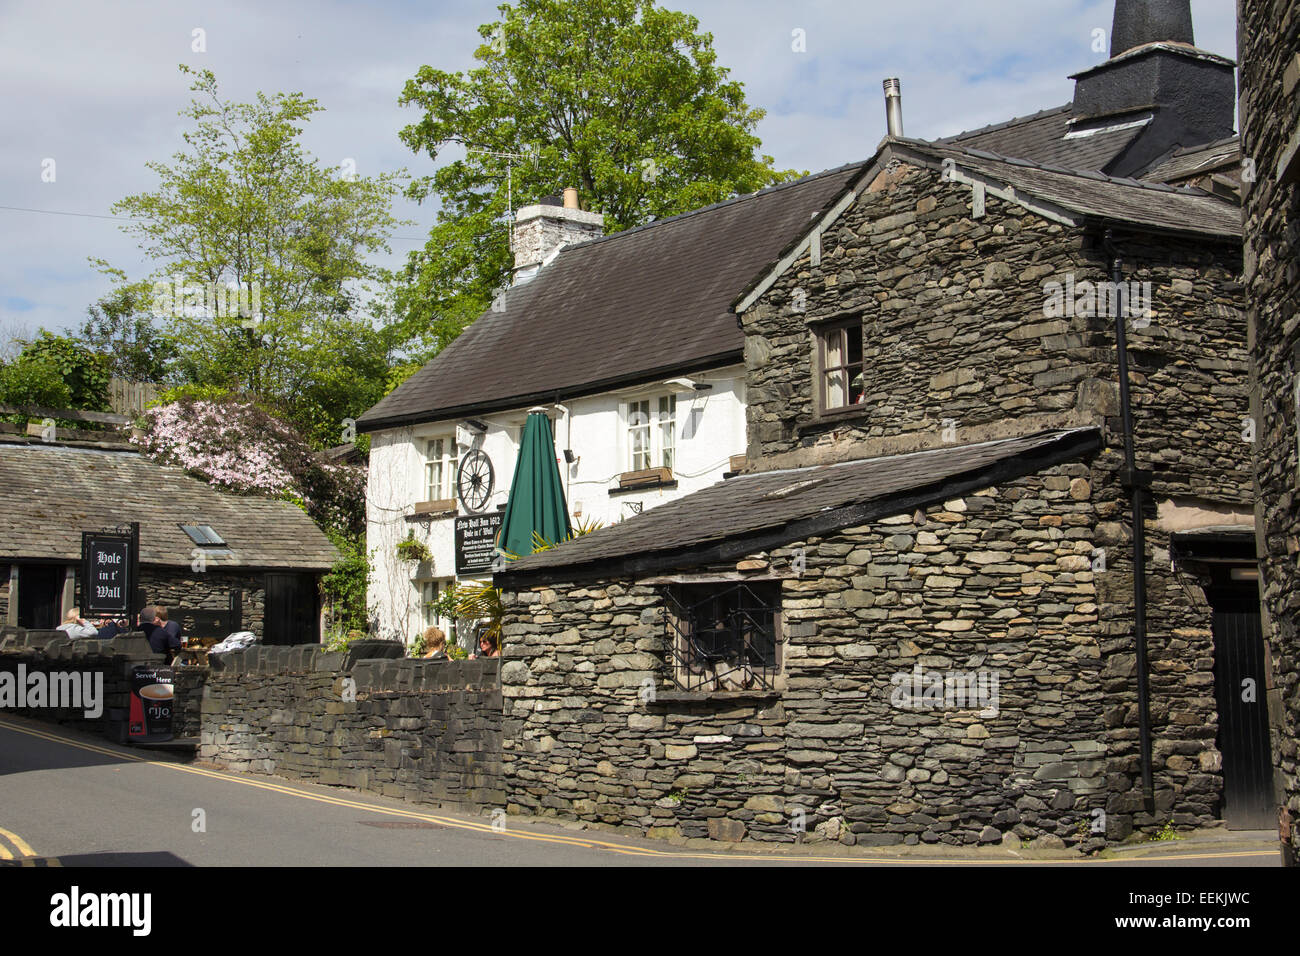 The New Hall Inn, also known as the  'Hole in t' Wall', the oldest pub in Bowness, Cumbria, Dating from 1612. Stock Photo